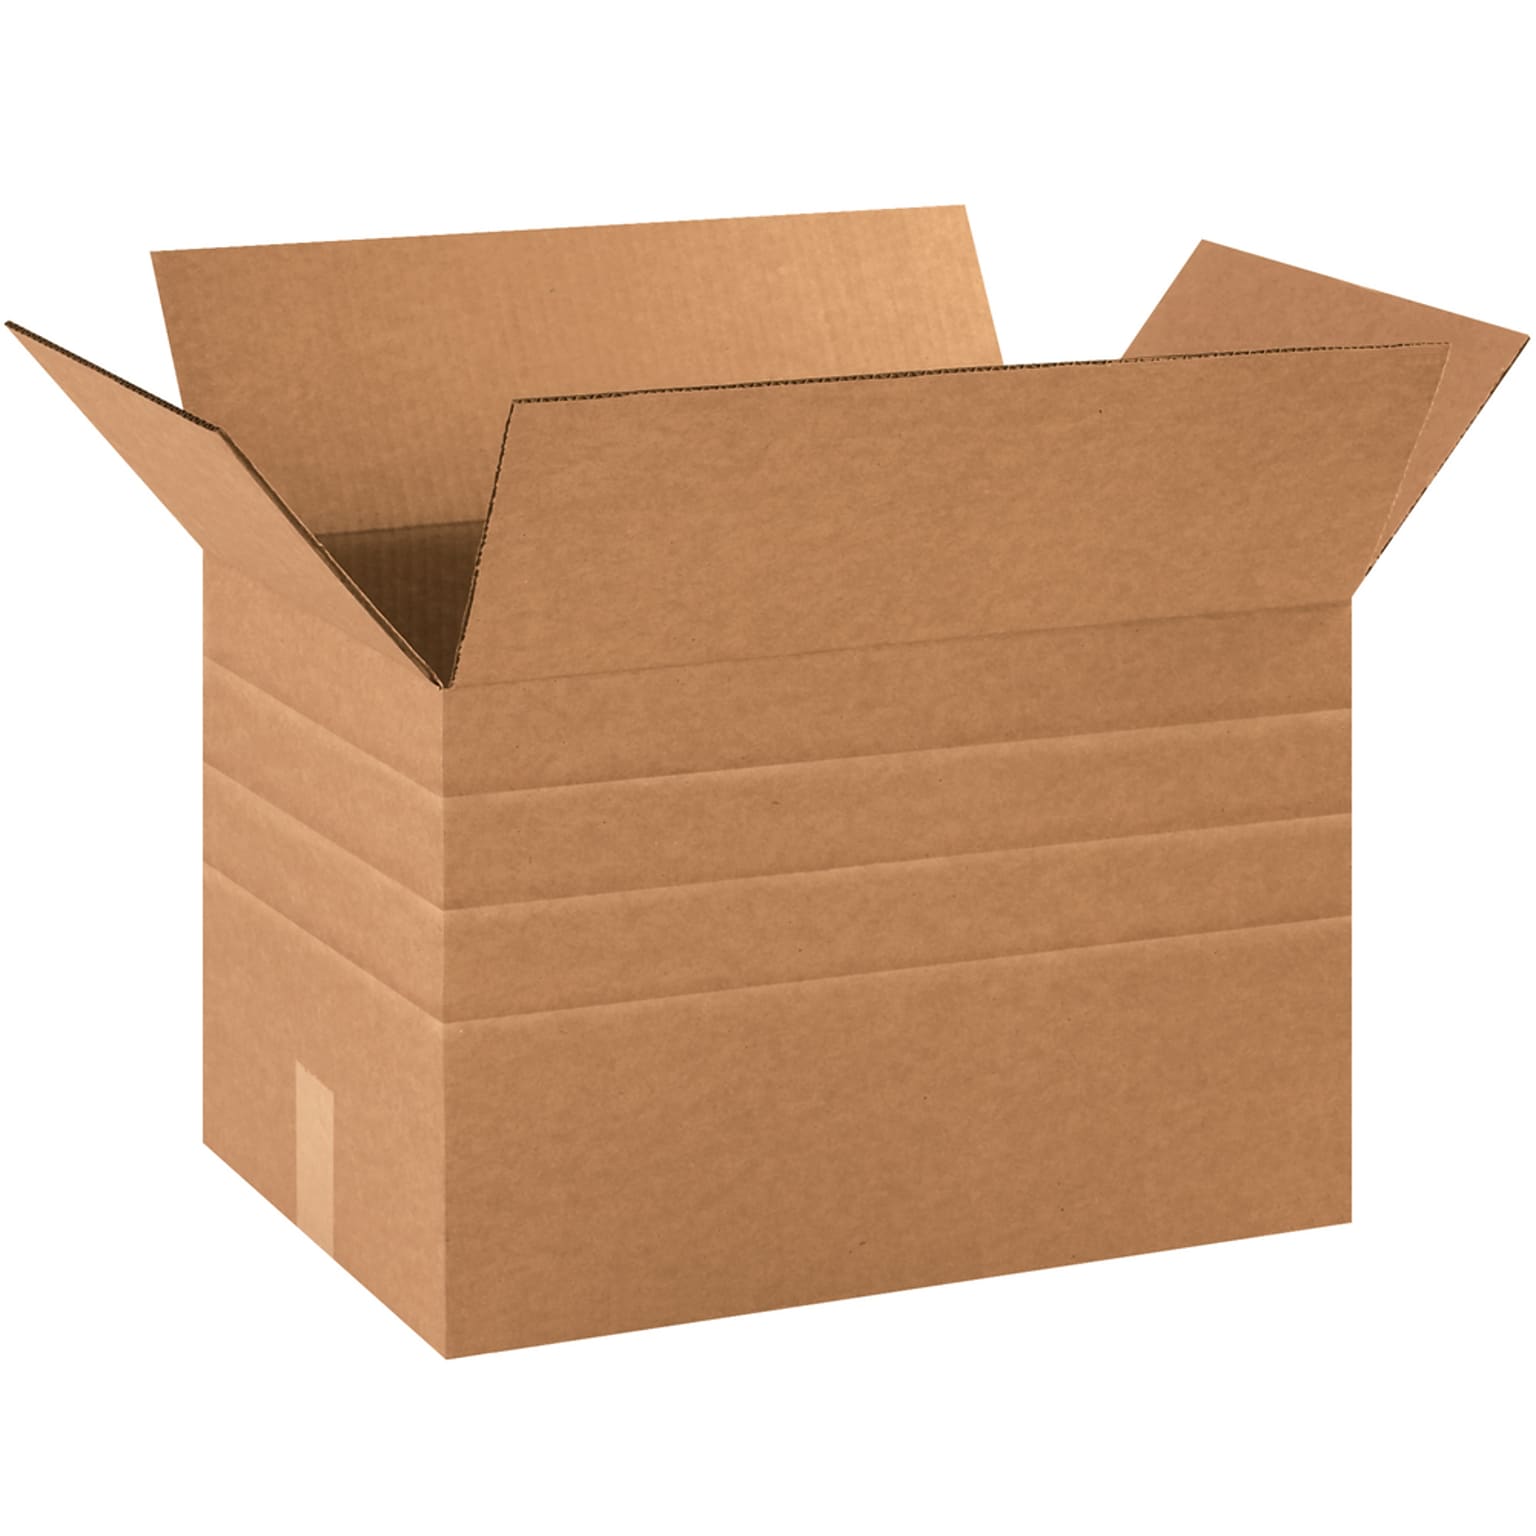 Quill Brand 18 x 12 x 12 Multi-Depth Shipping Boxes, 200#/ECT-32 Mullen Rated Corrugated, Pack of 25, (MD181212)